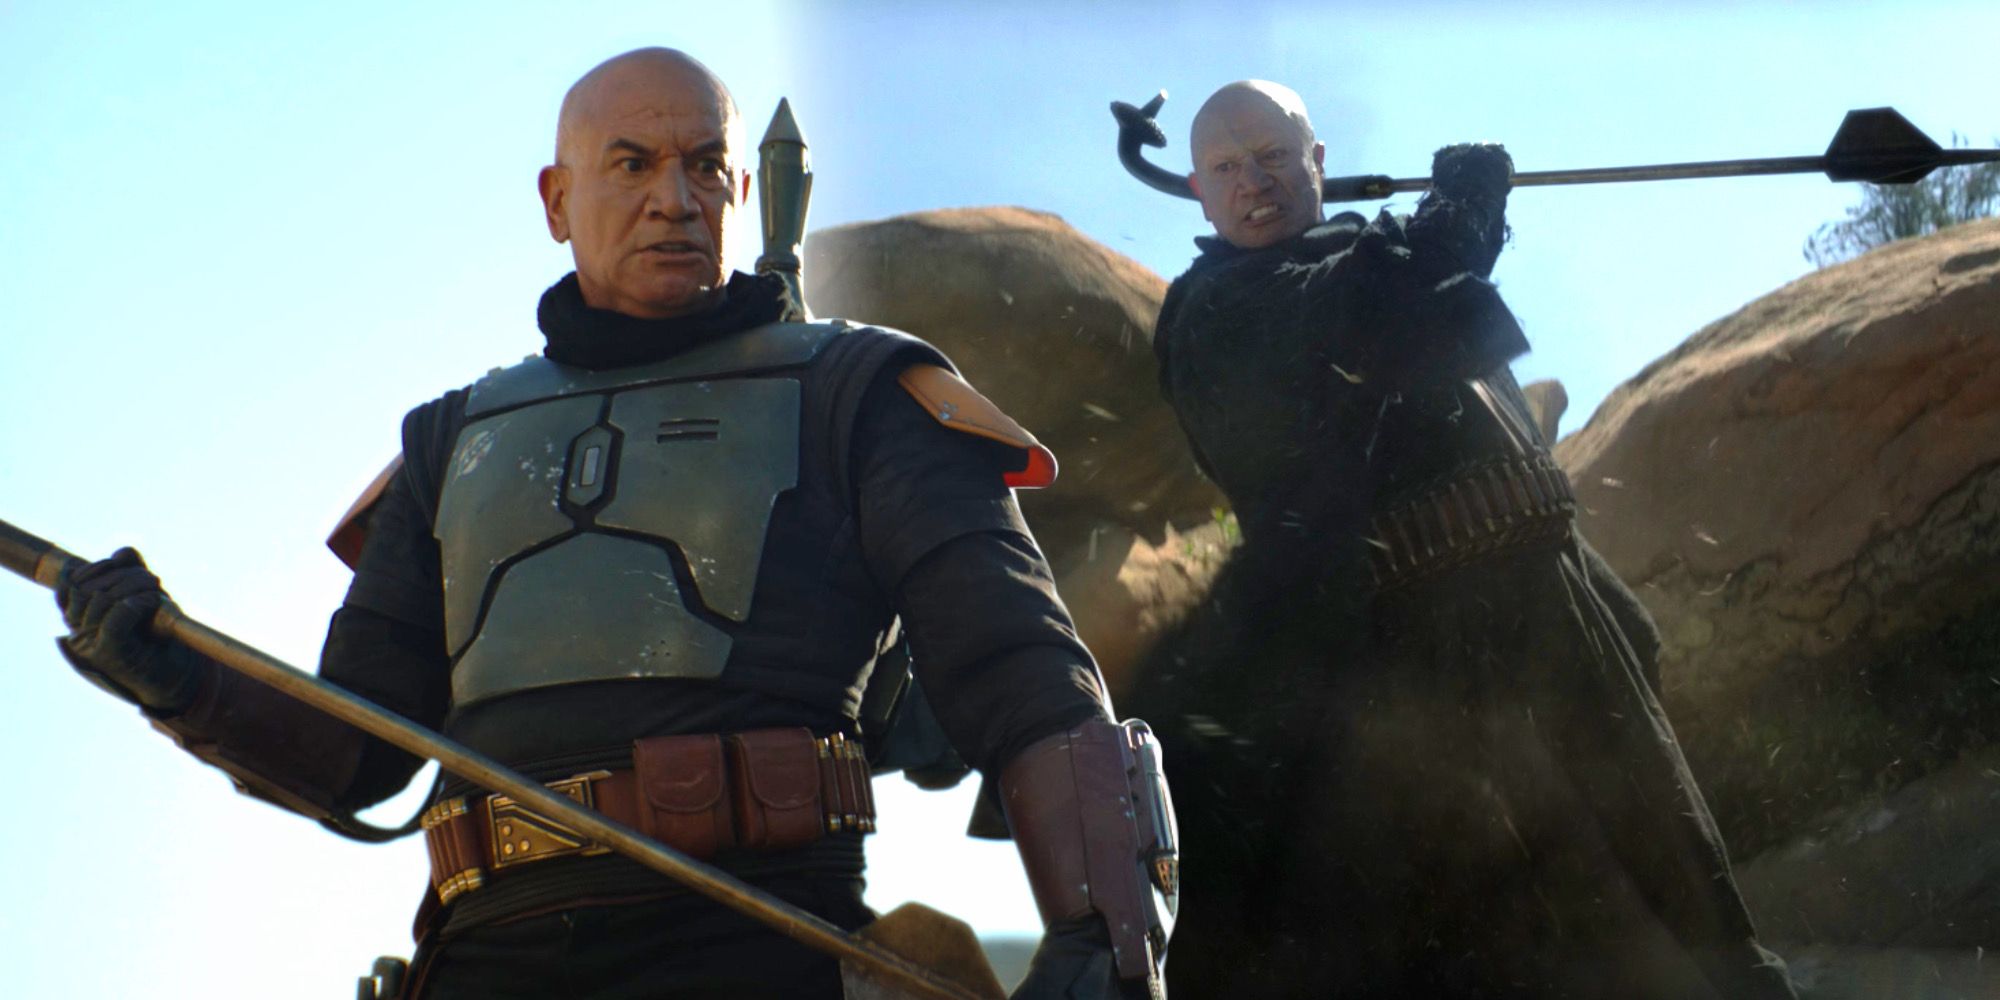 Temuera Morrison And His Gaffi Stick In The Book Of Boba Fett And The Mandalorian